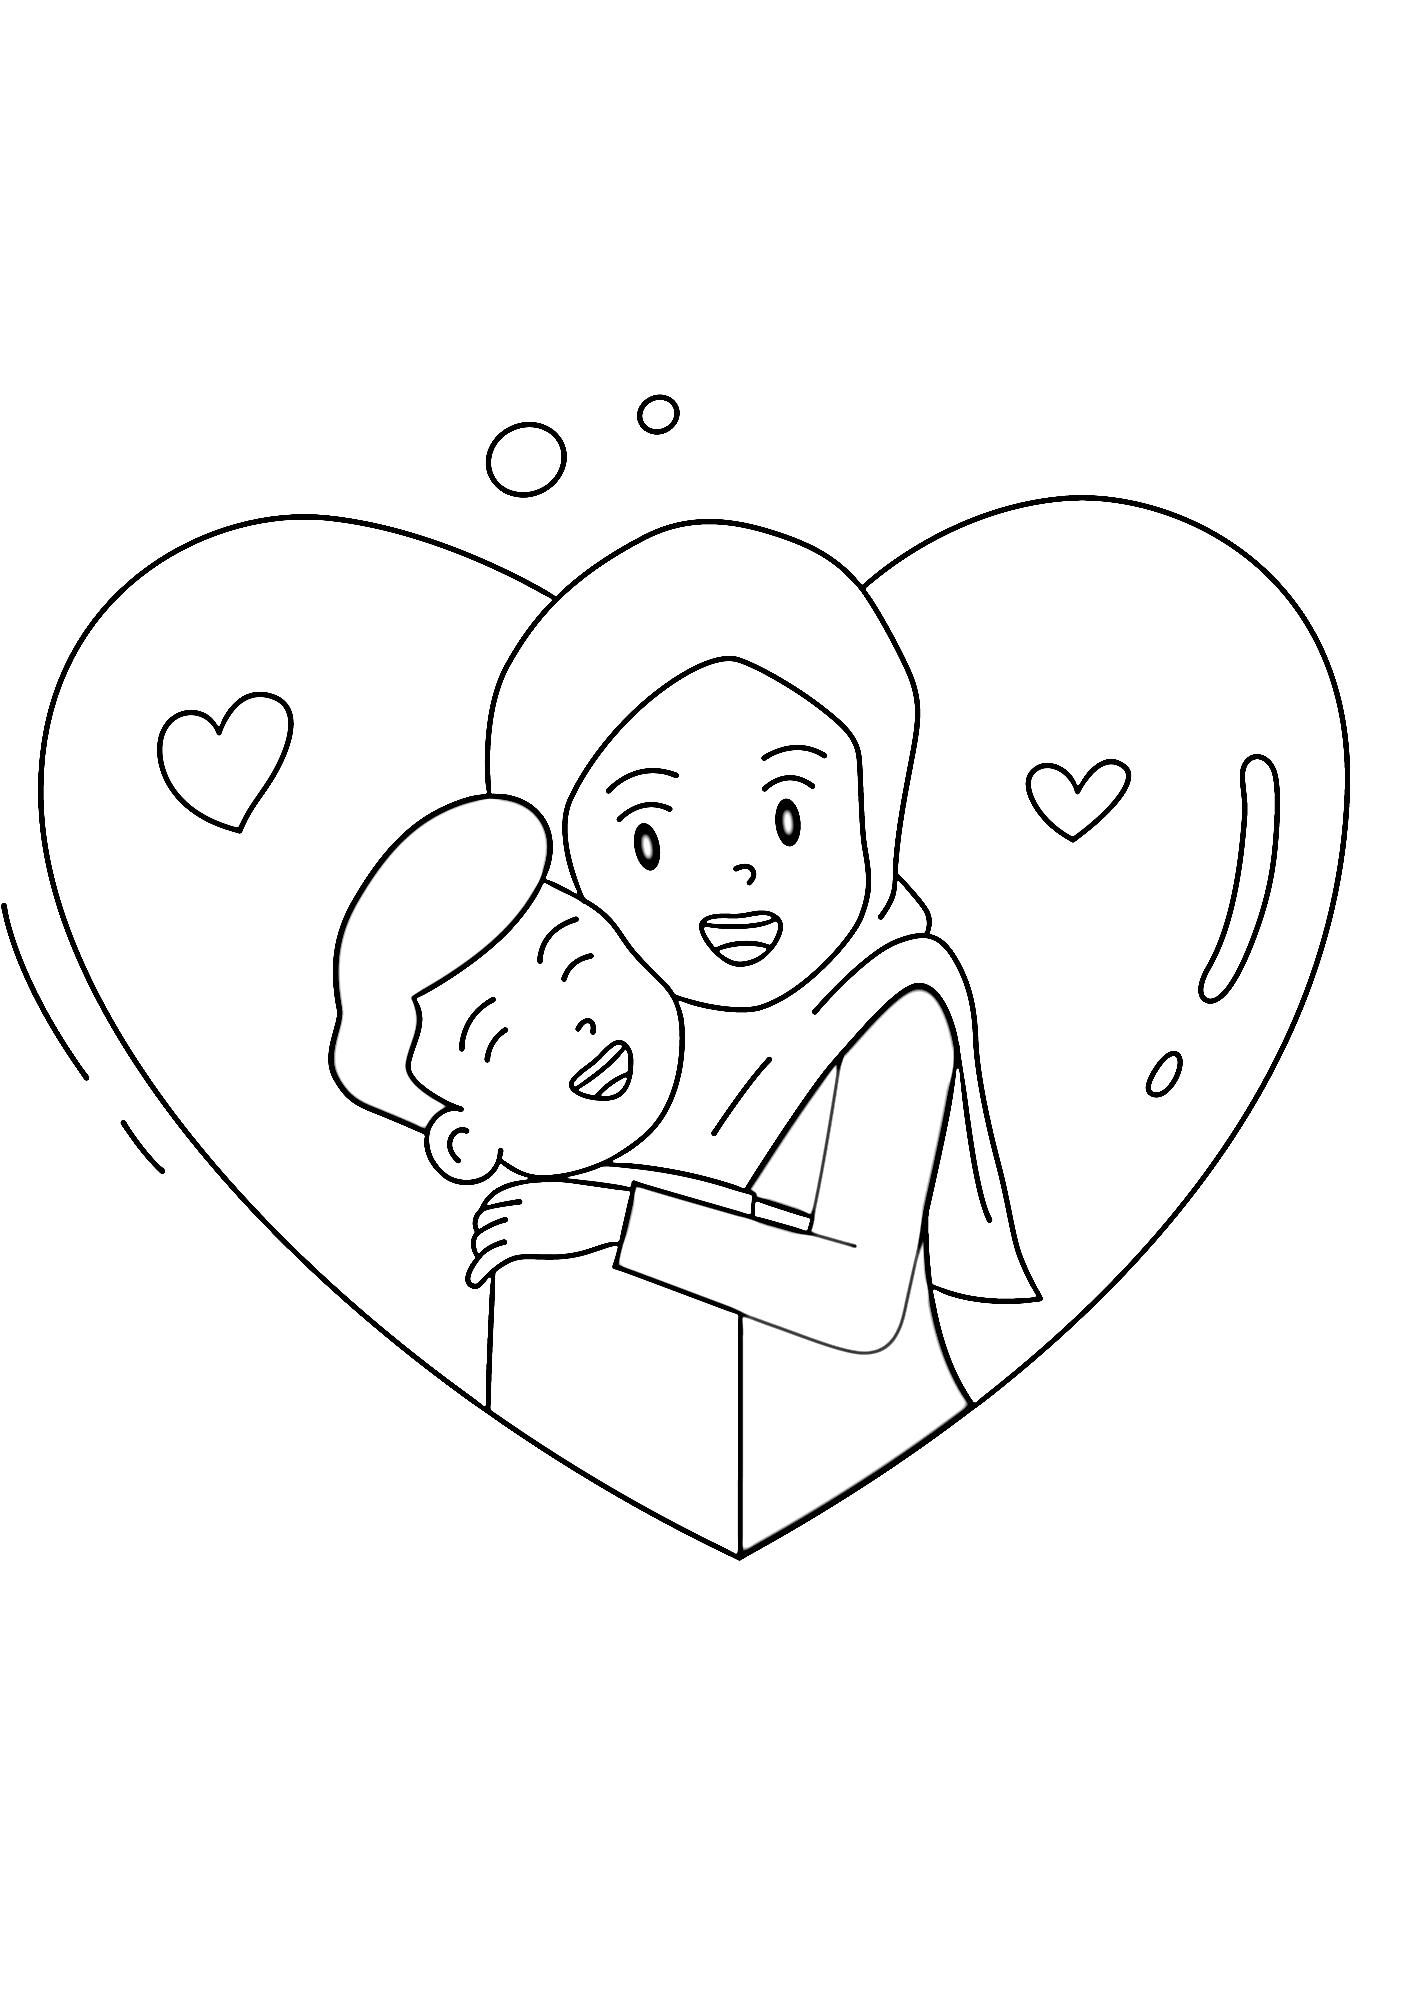 Simple Art Mother's Day Coloring Pages